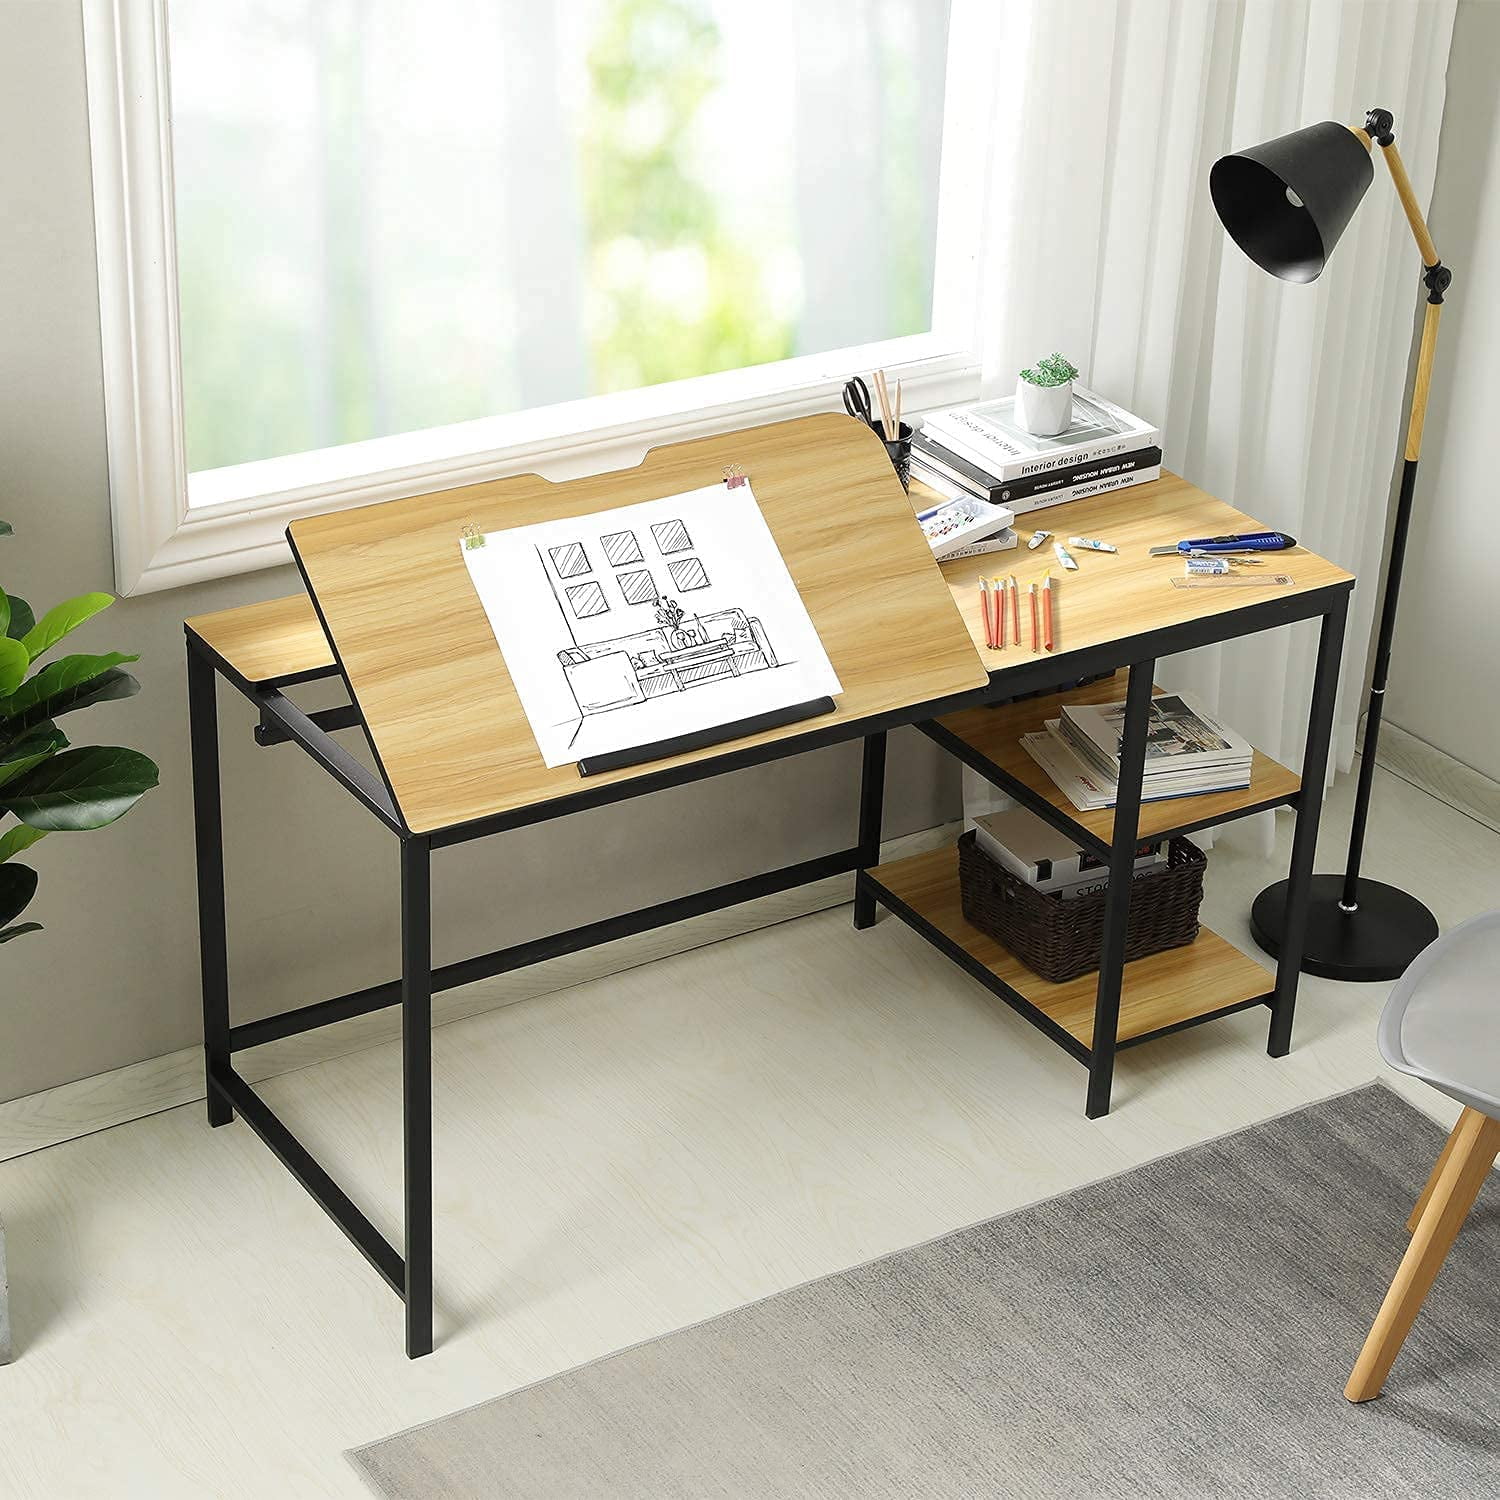 Craft Table for Home Office Adjustable Drafting Draft Drawing Table Artist Desk Tilted Tabletop Art Desk Watercolor Paintings Sketching Work Station Hobby Drawing Drafting